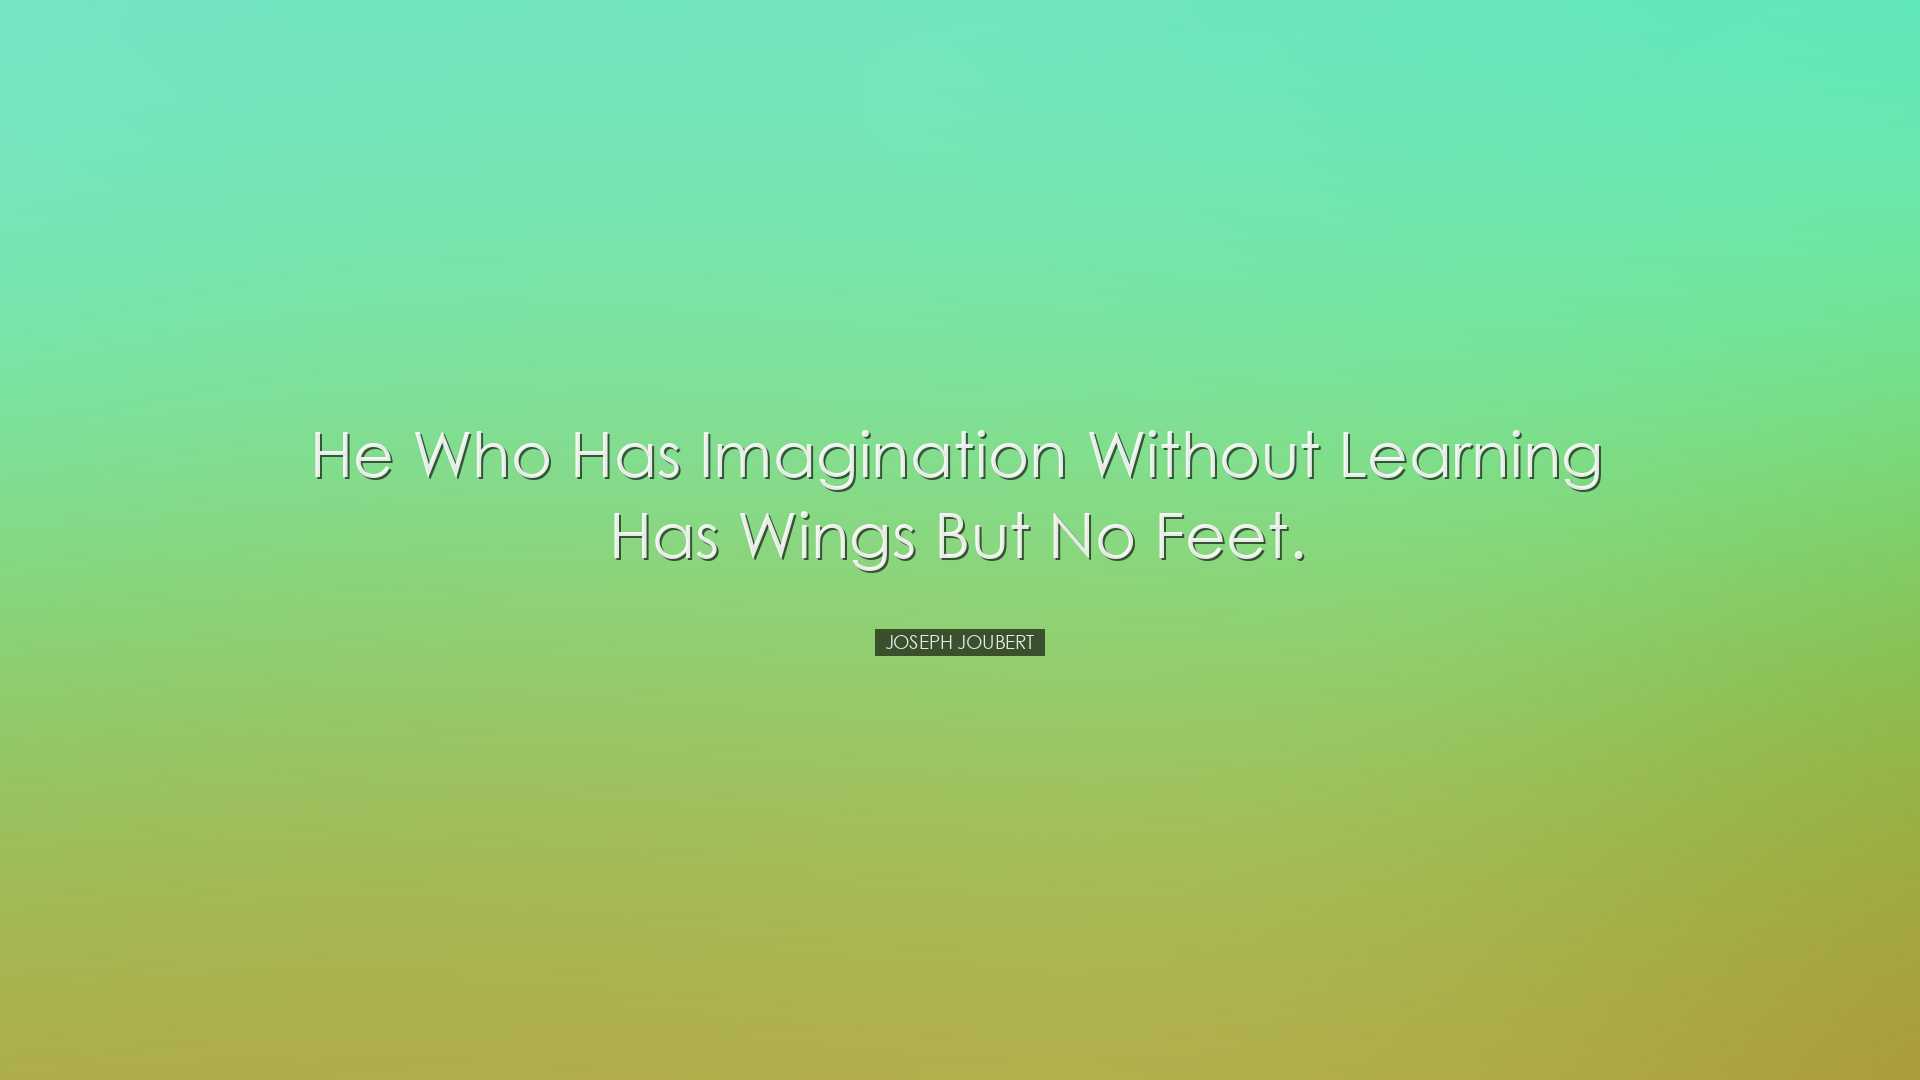 He who has imagination without learning has wings but no feet. - J